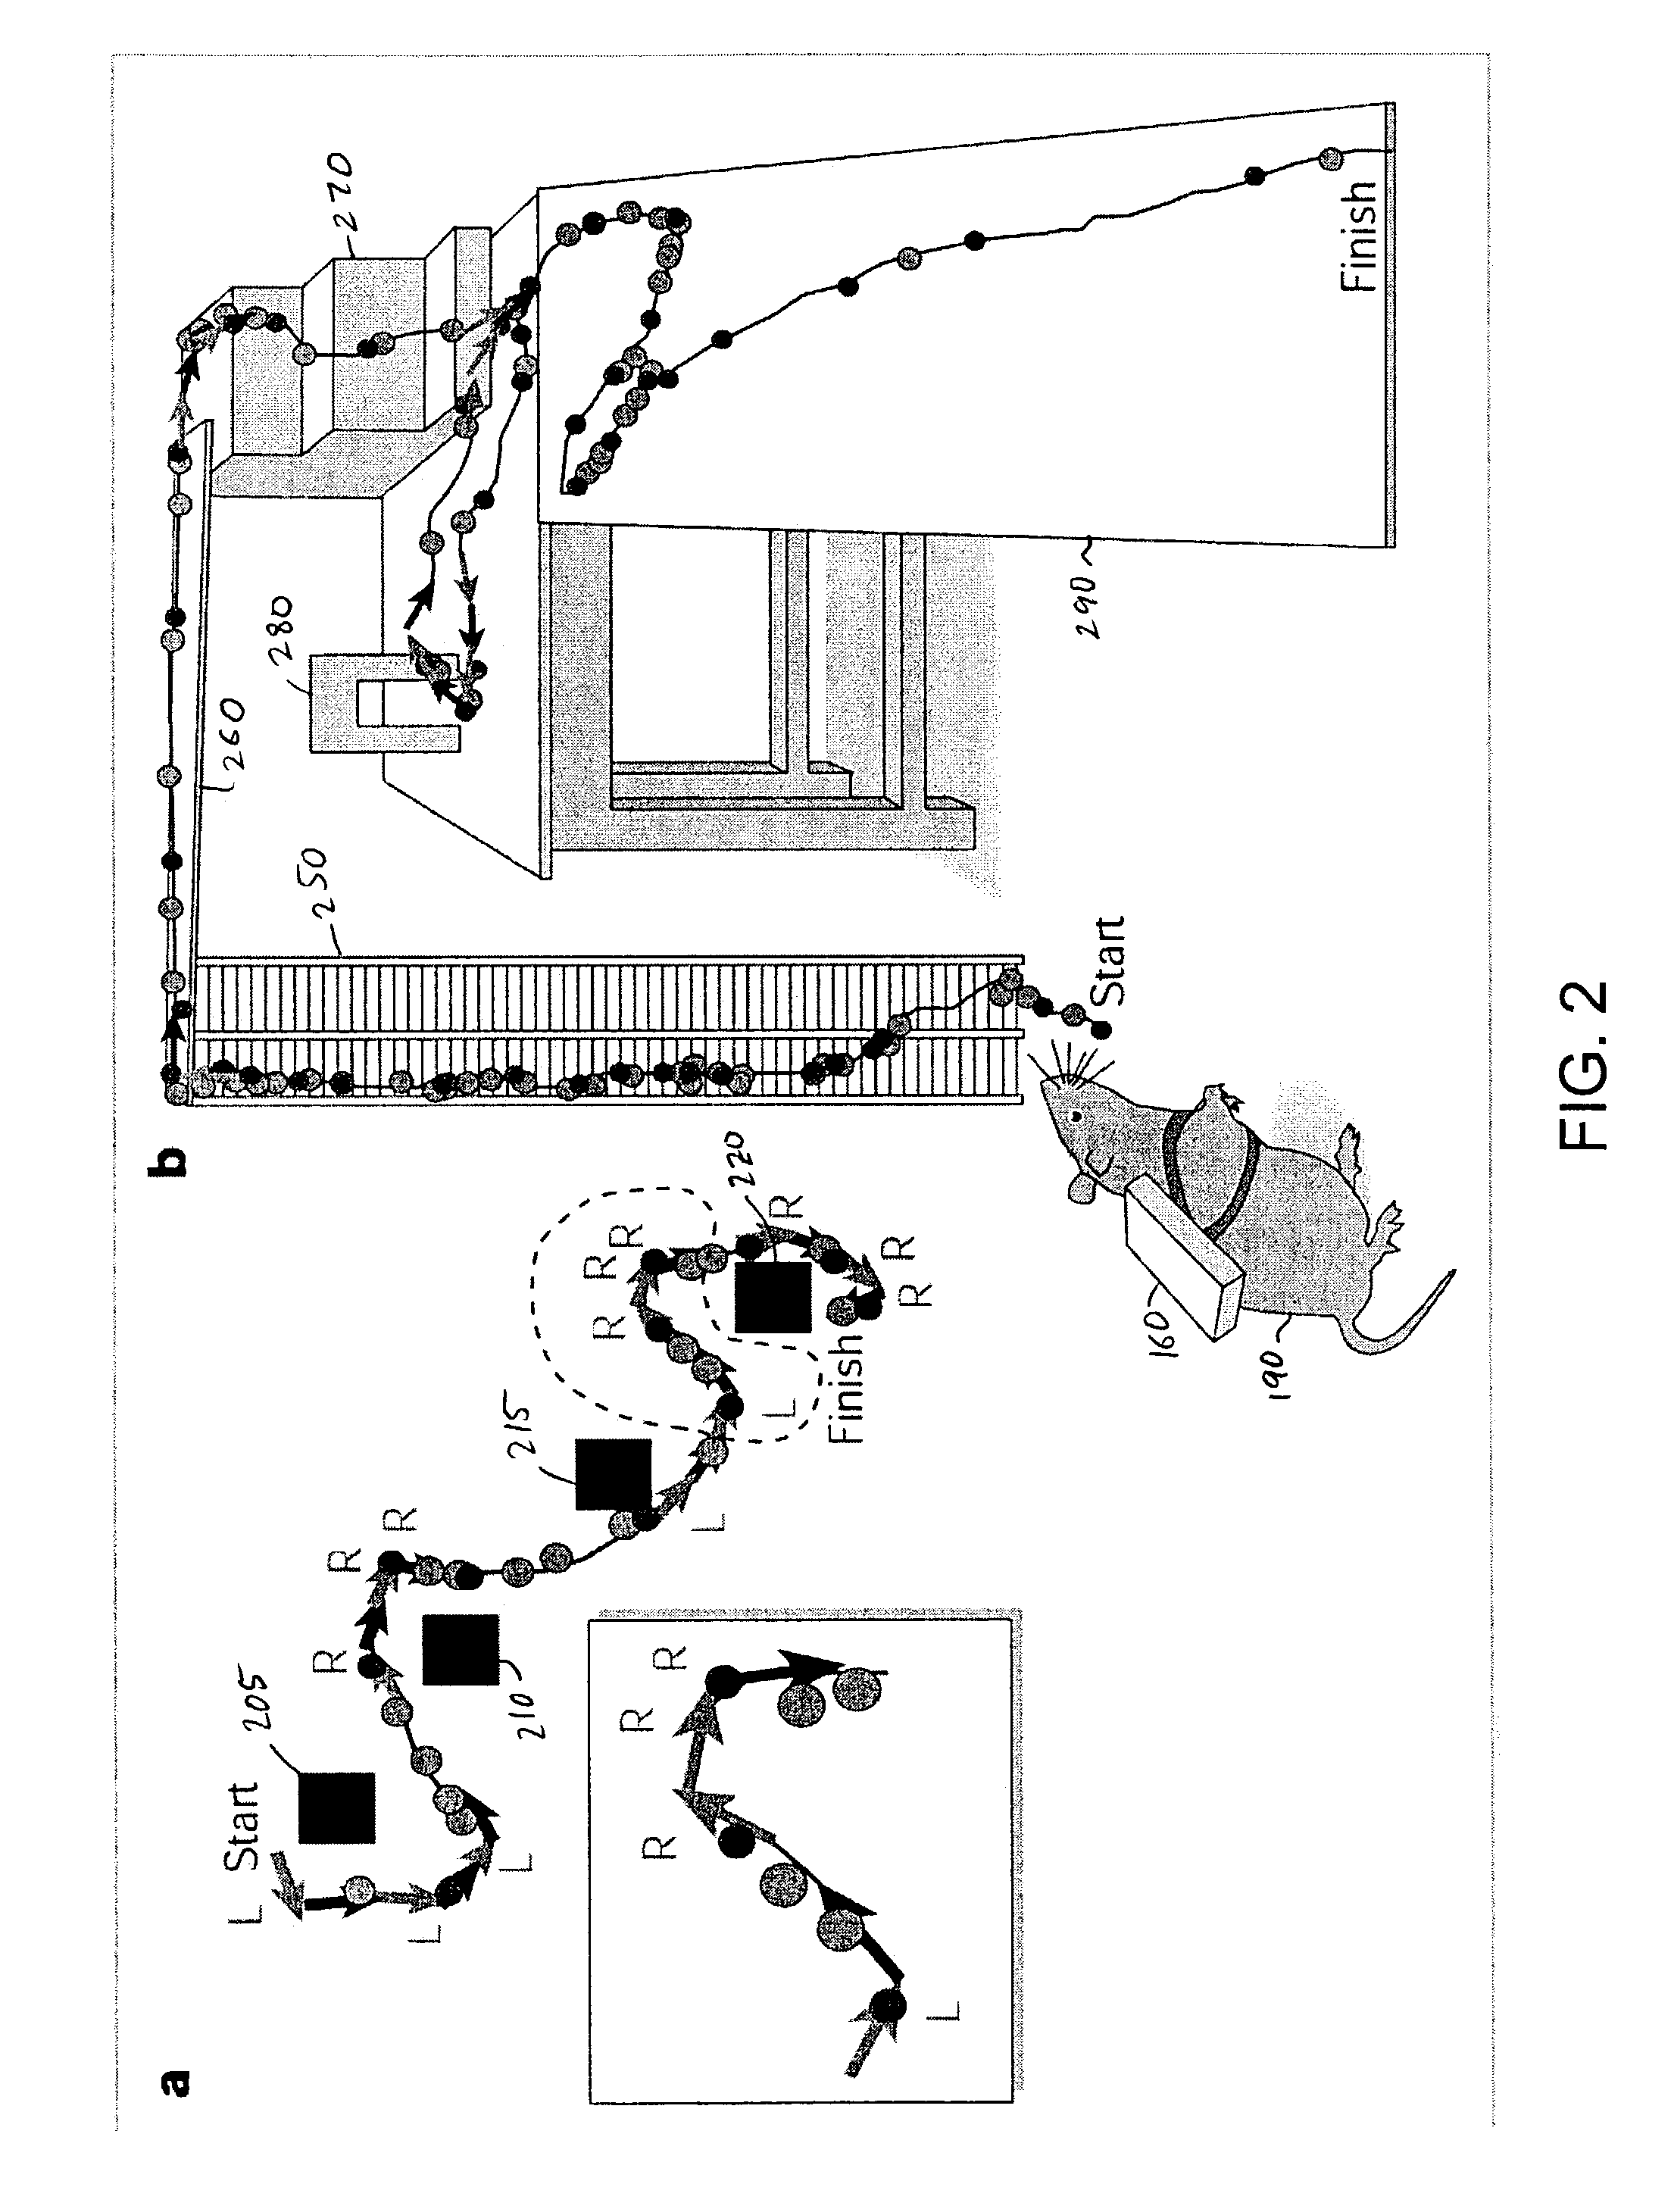 Method and apparatus for guiding movement of a freely roaming animal through brain stimulation